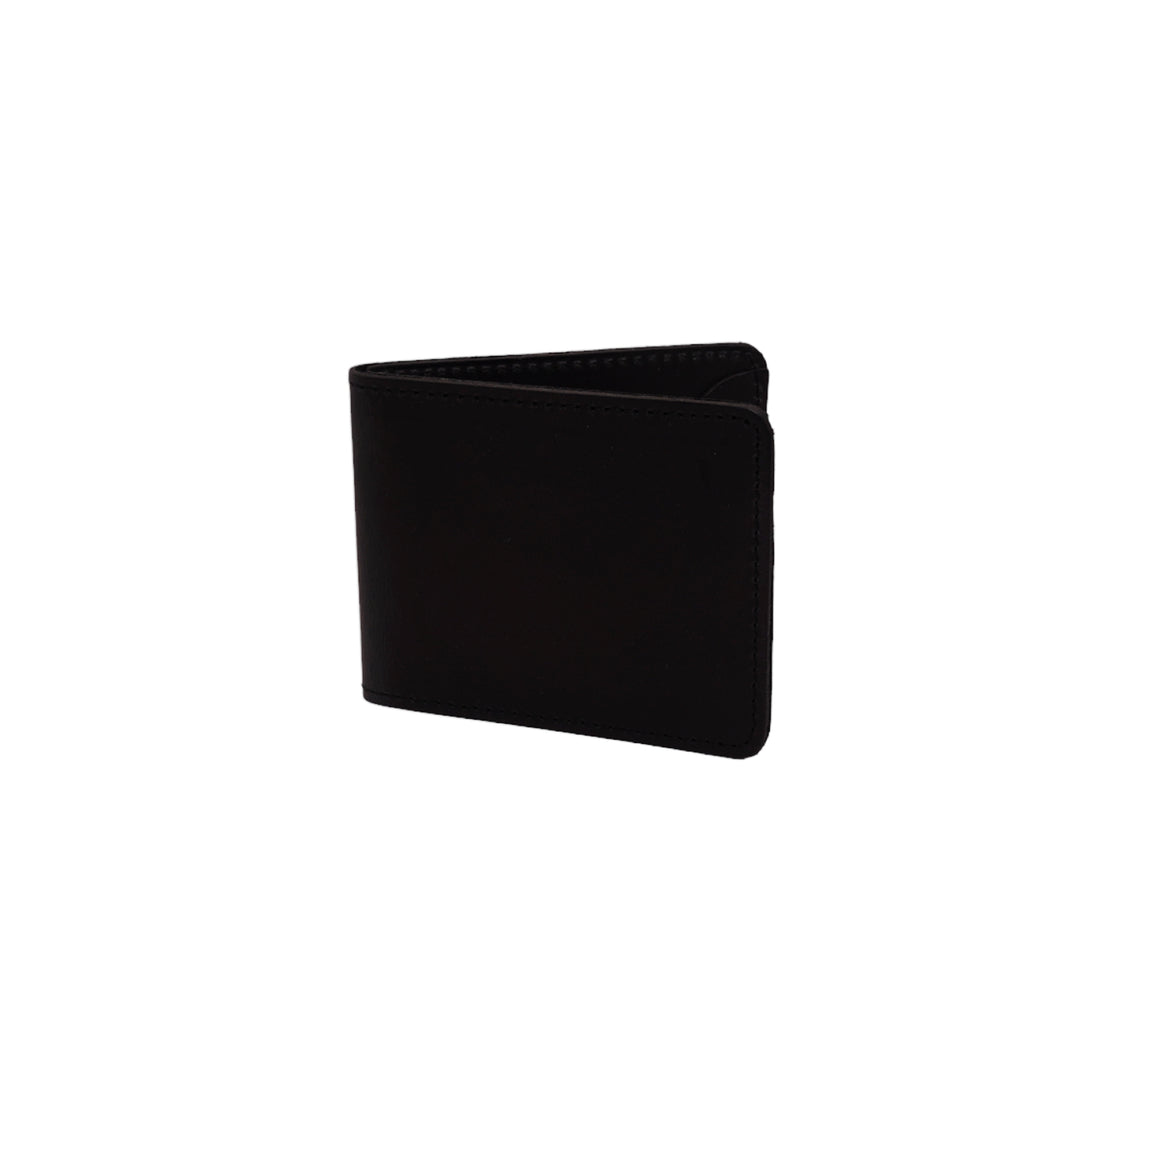 Black Distressed Leather Bi-fold Wallet | What Good Shall I do?